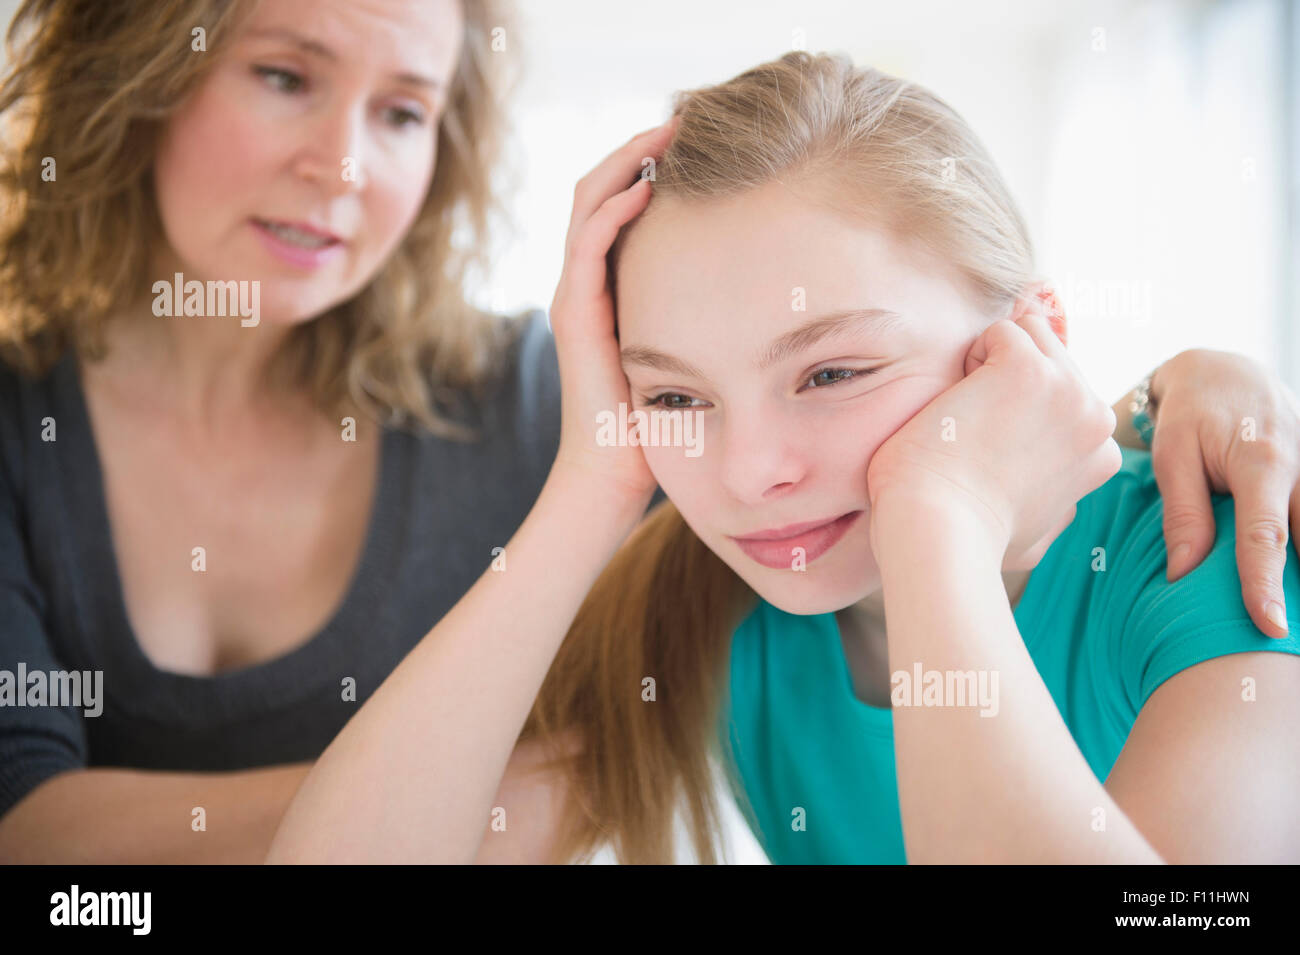 Caucasian mother comforting crying daughter Stock Photo